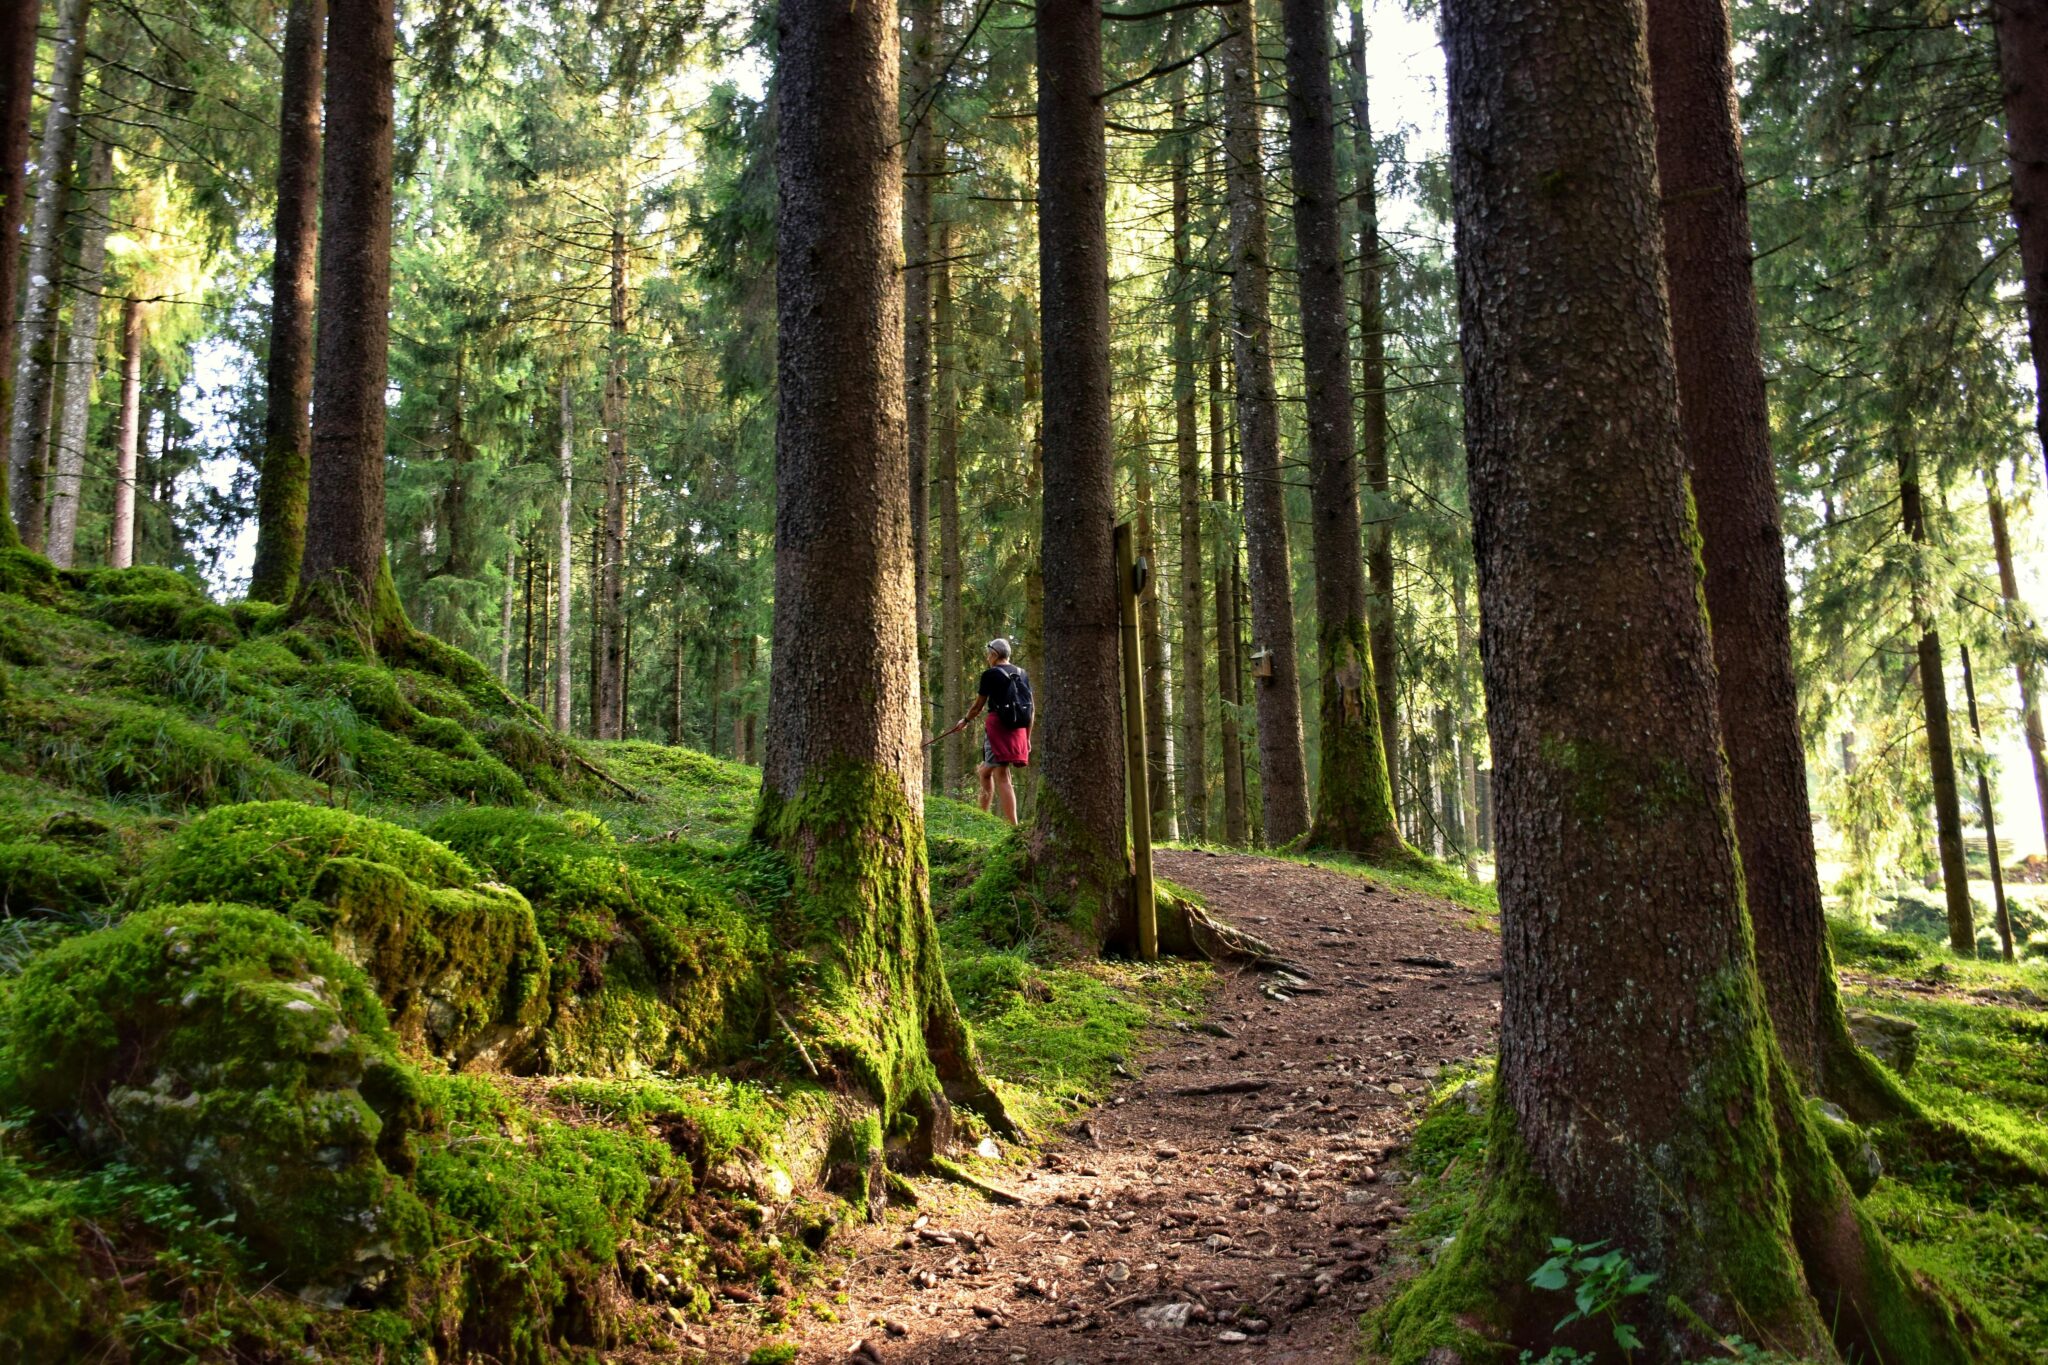 Forest Bathing Eases Grief by Soaking in Nature - SevenPonds ...